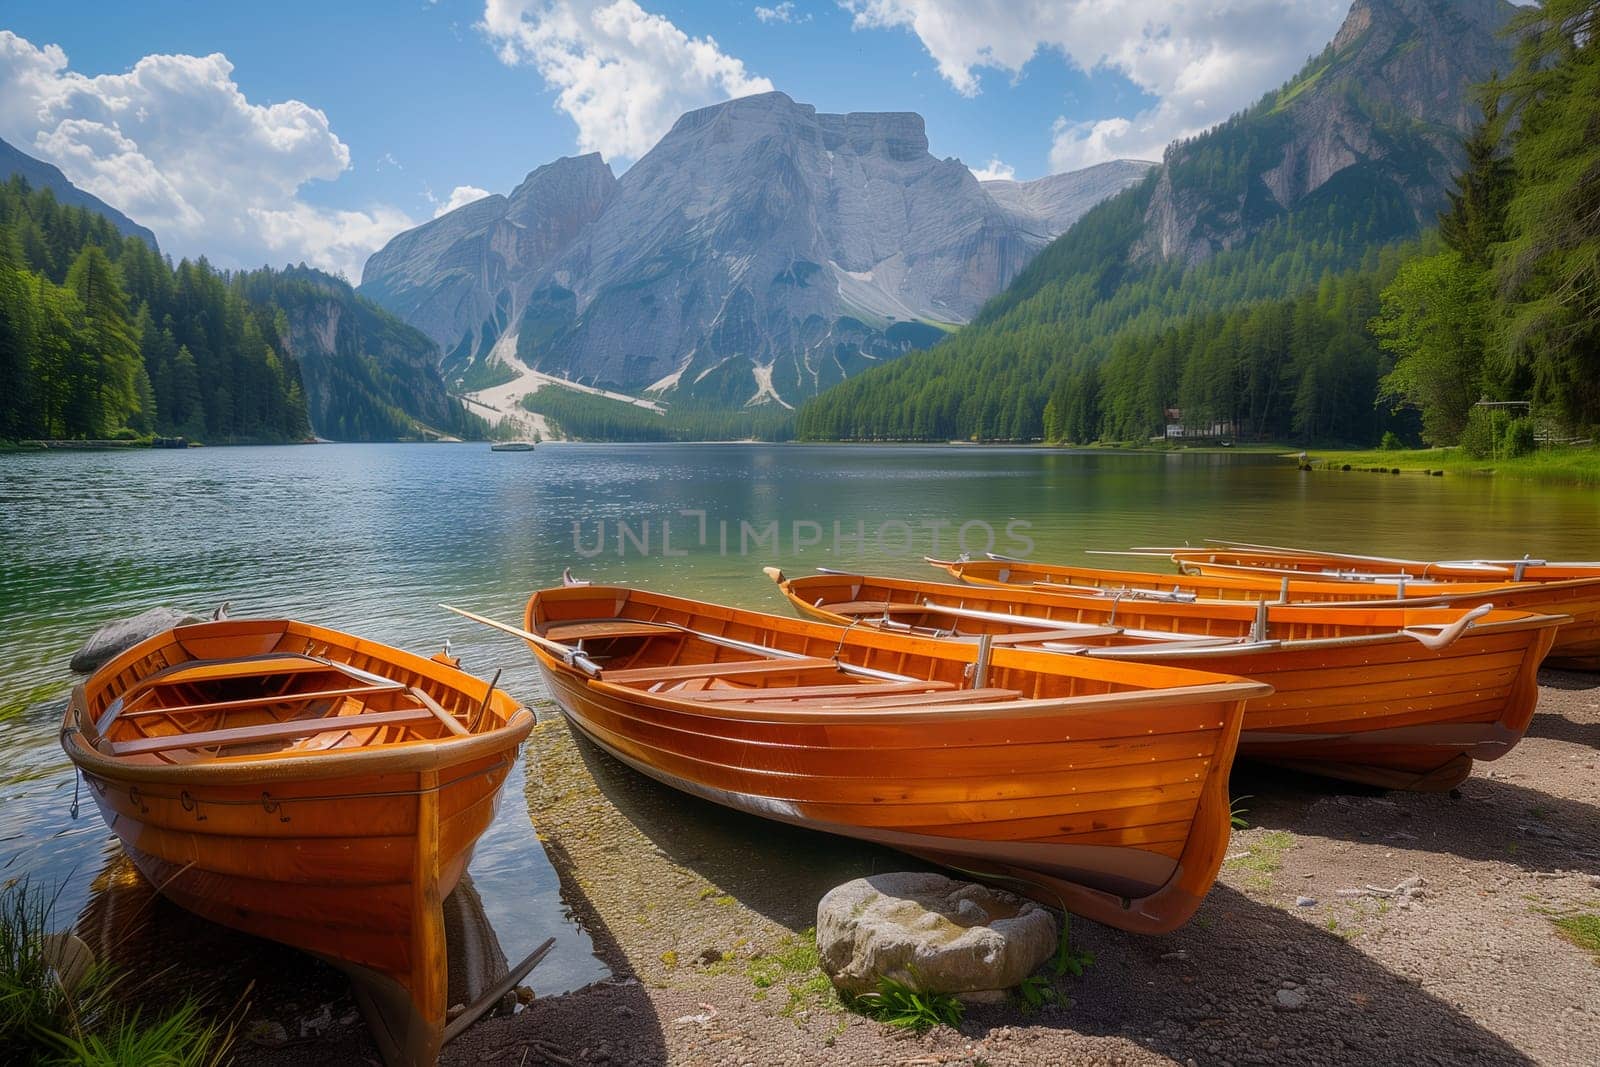 Group of Wooden Boats on Lake by Sd28DimoN_1976